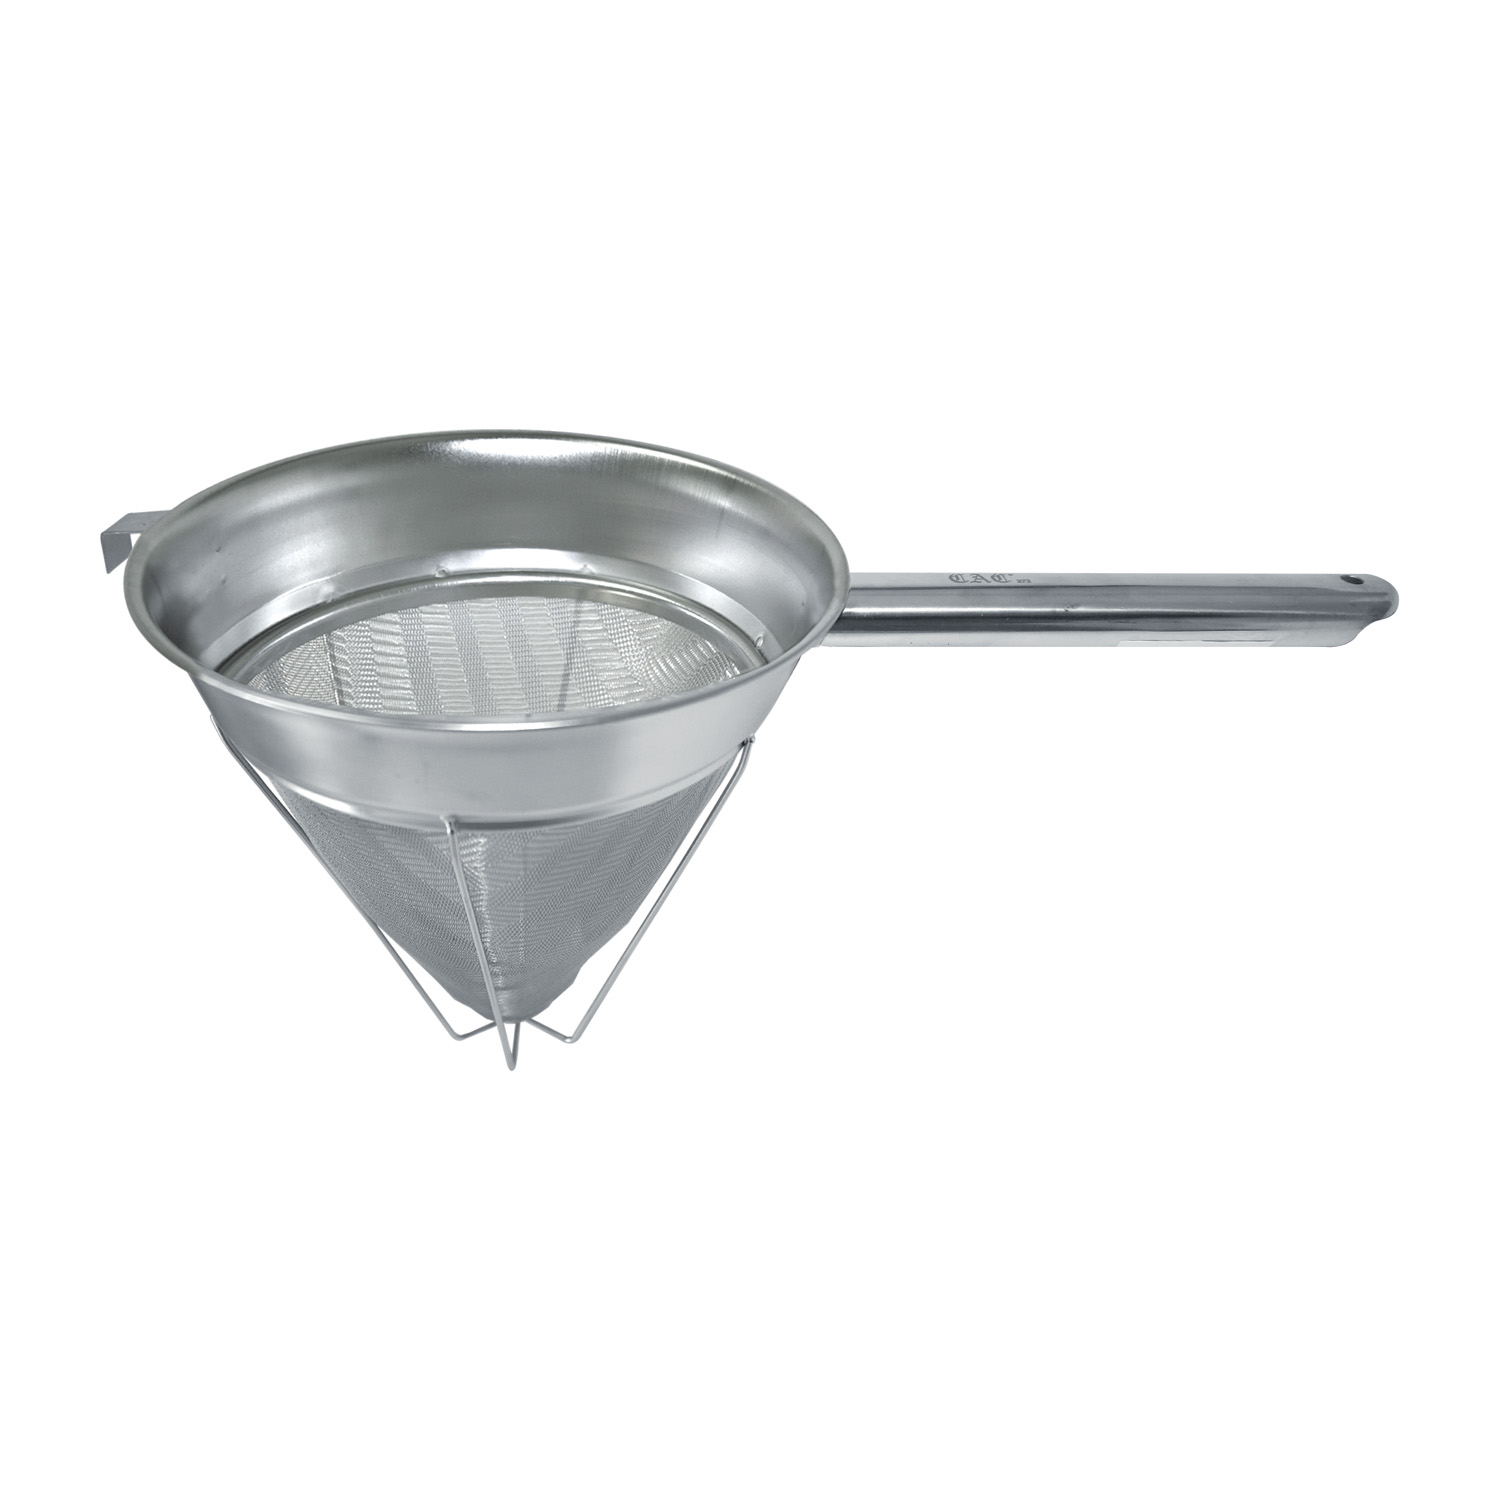 CAC China KUSN-10X Reinforced Stainless Steel Bouillon/Chinois Strainer 10"